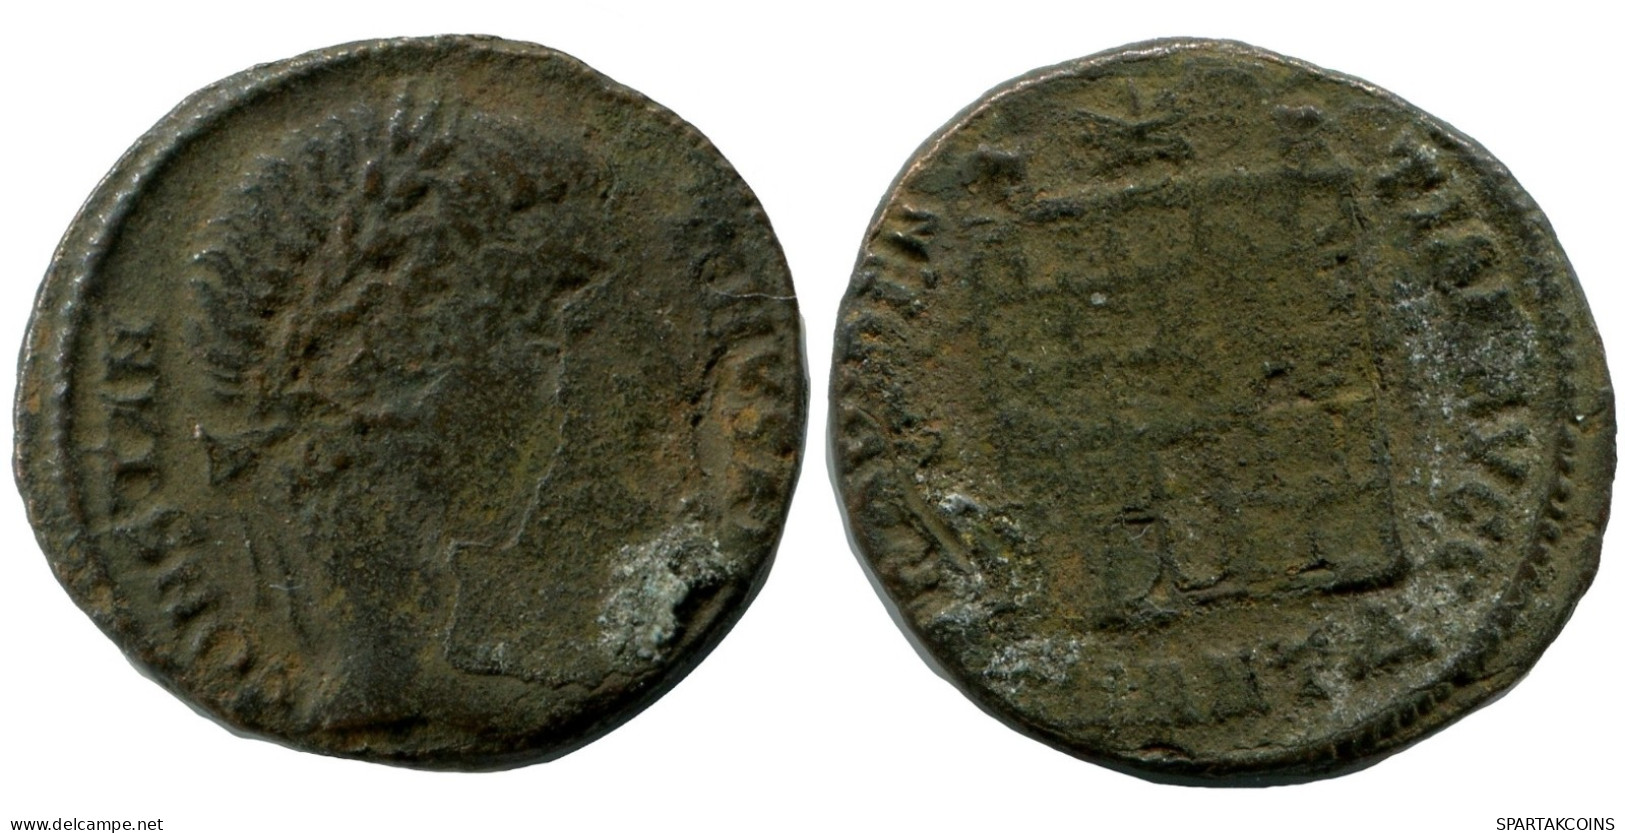 CONSTANTINE I MINTED IN ANTIOCH FROM THE ROYAL ONTARIO MUSEUM #ANC10607.14.U.A - The Christian Empire (307 AD Tot 363 AD)